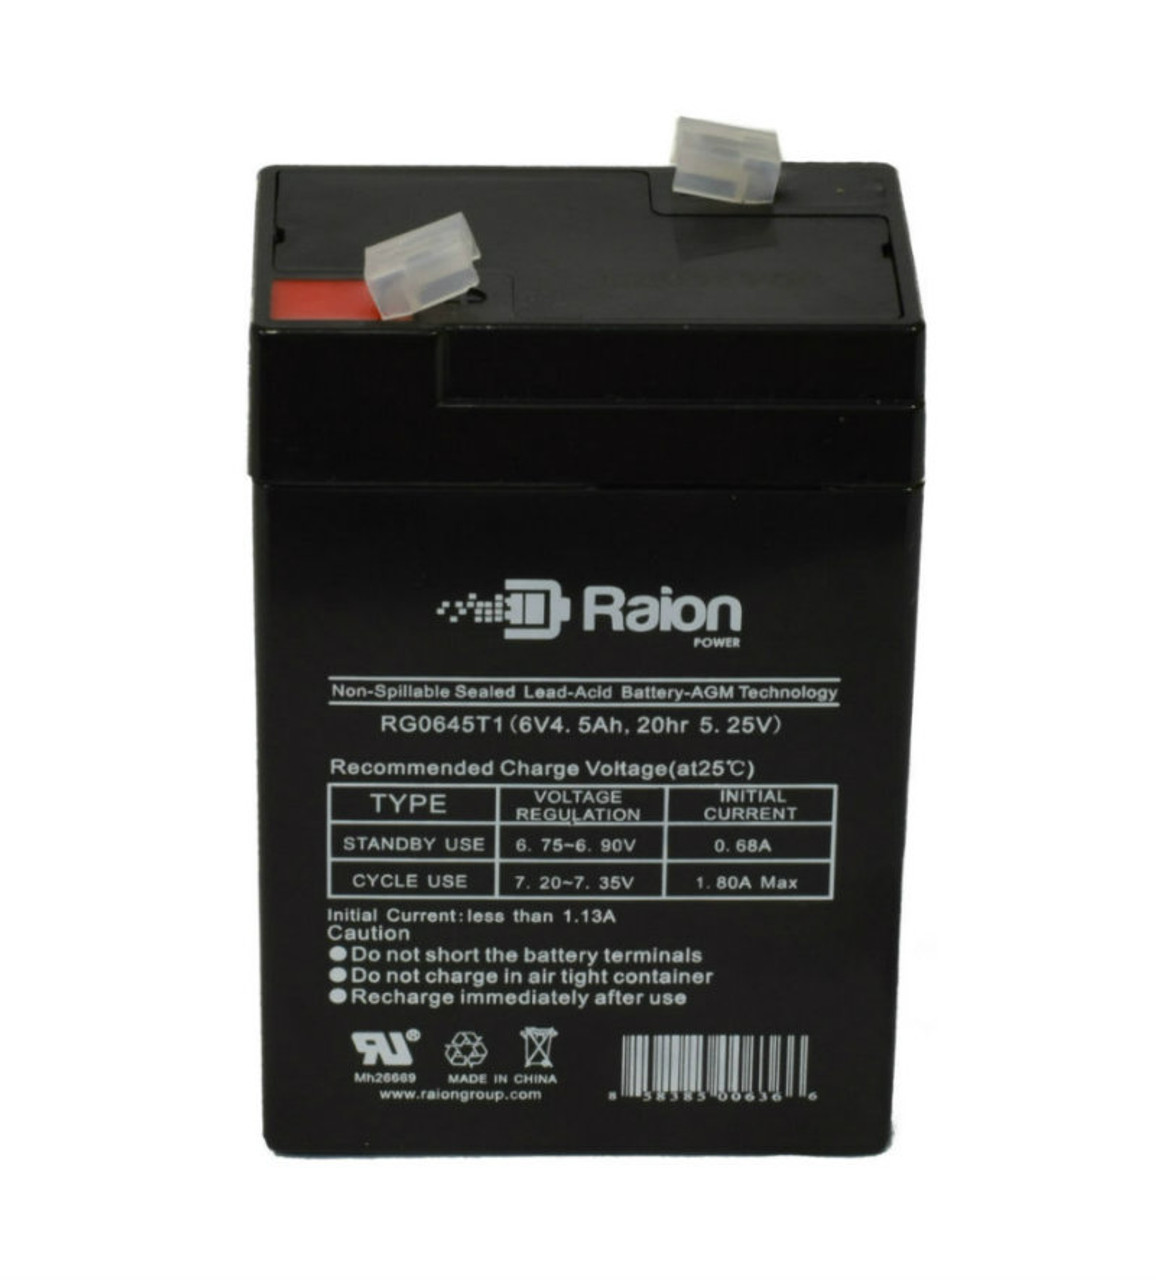 Raion Power RG0645T1 Replacement Battery Cartridge for Teledyne Big Beam S64